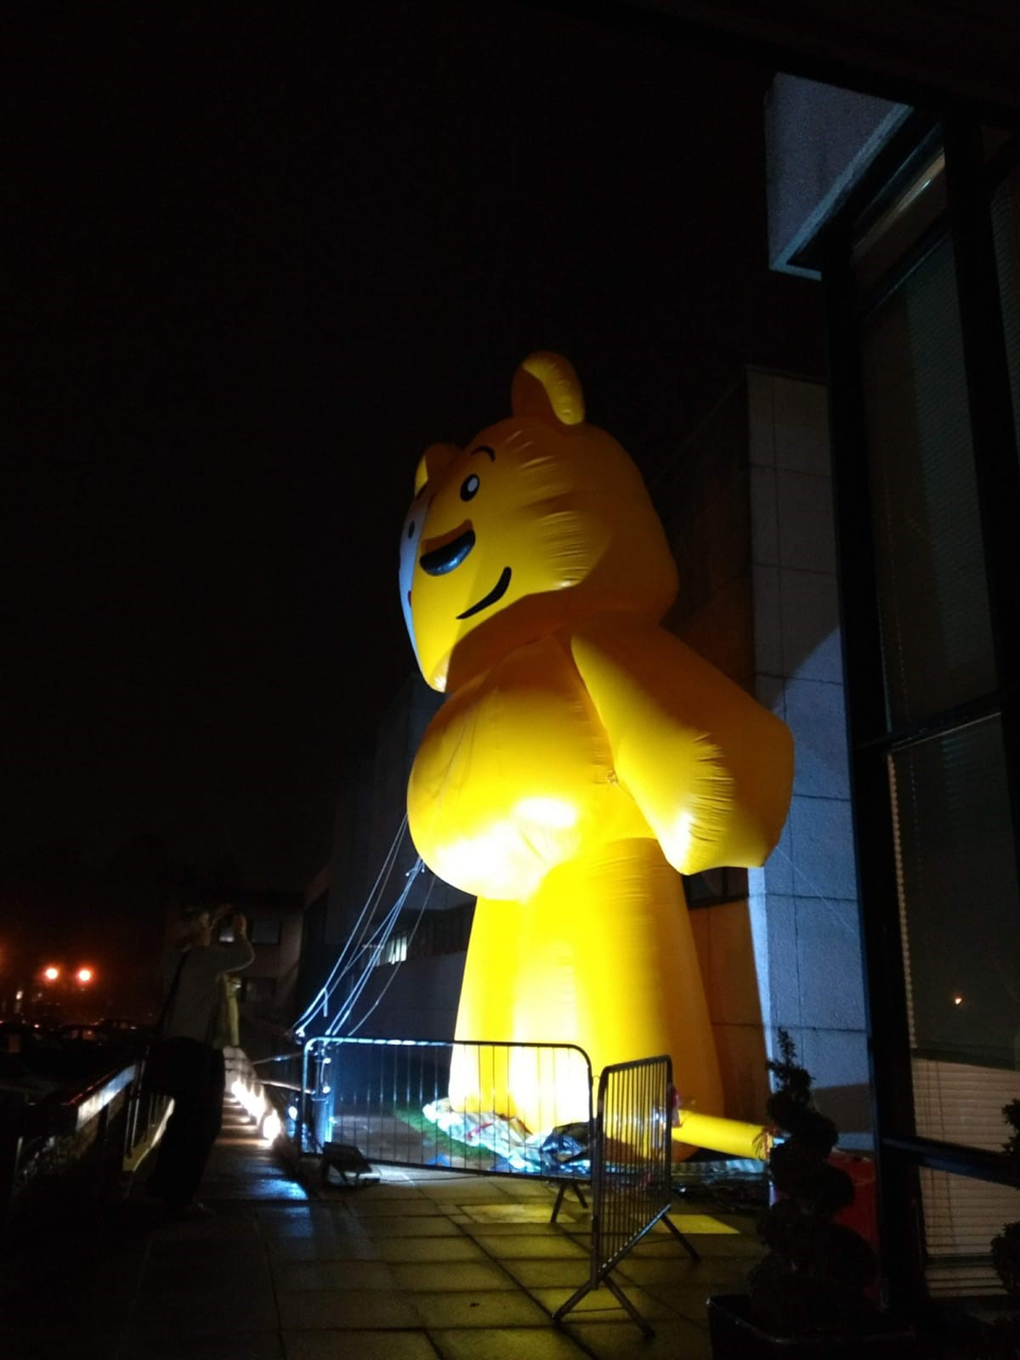 giant bear outside BBC Wales building